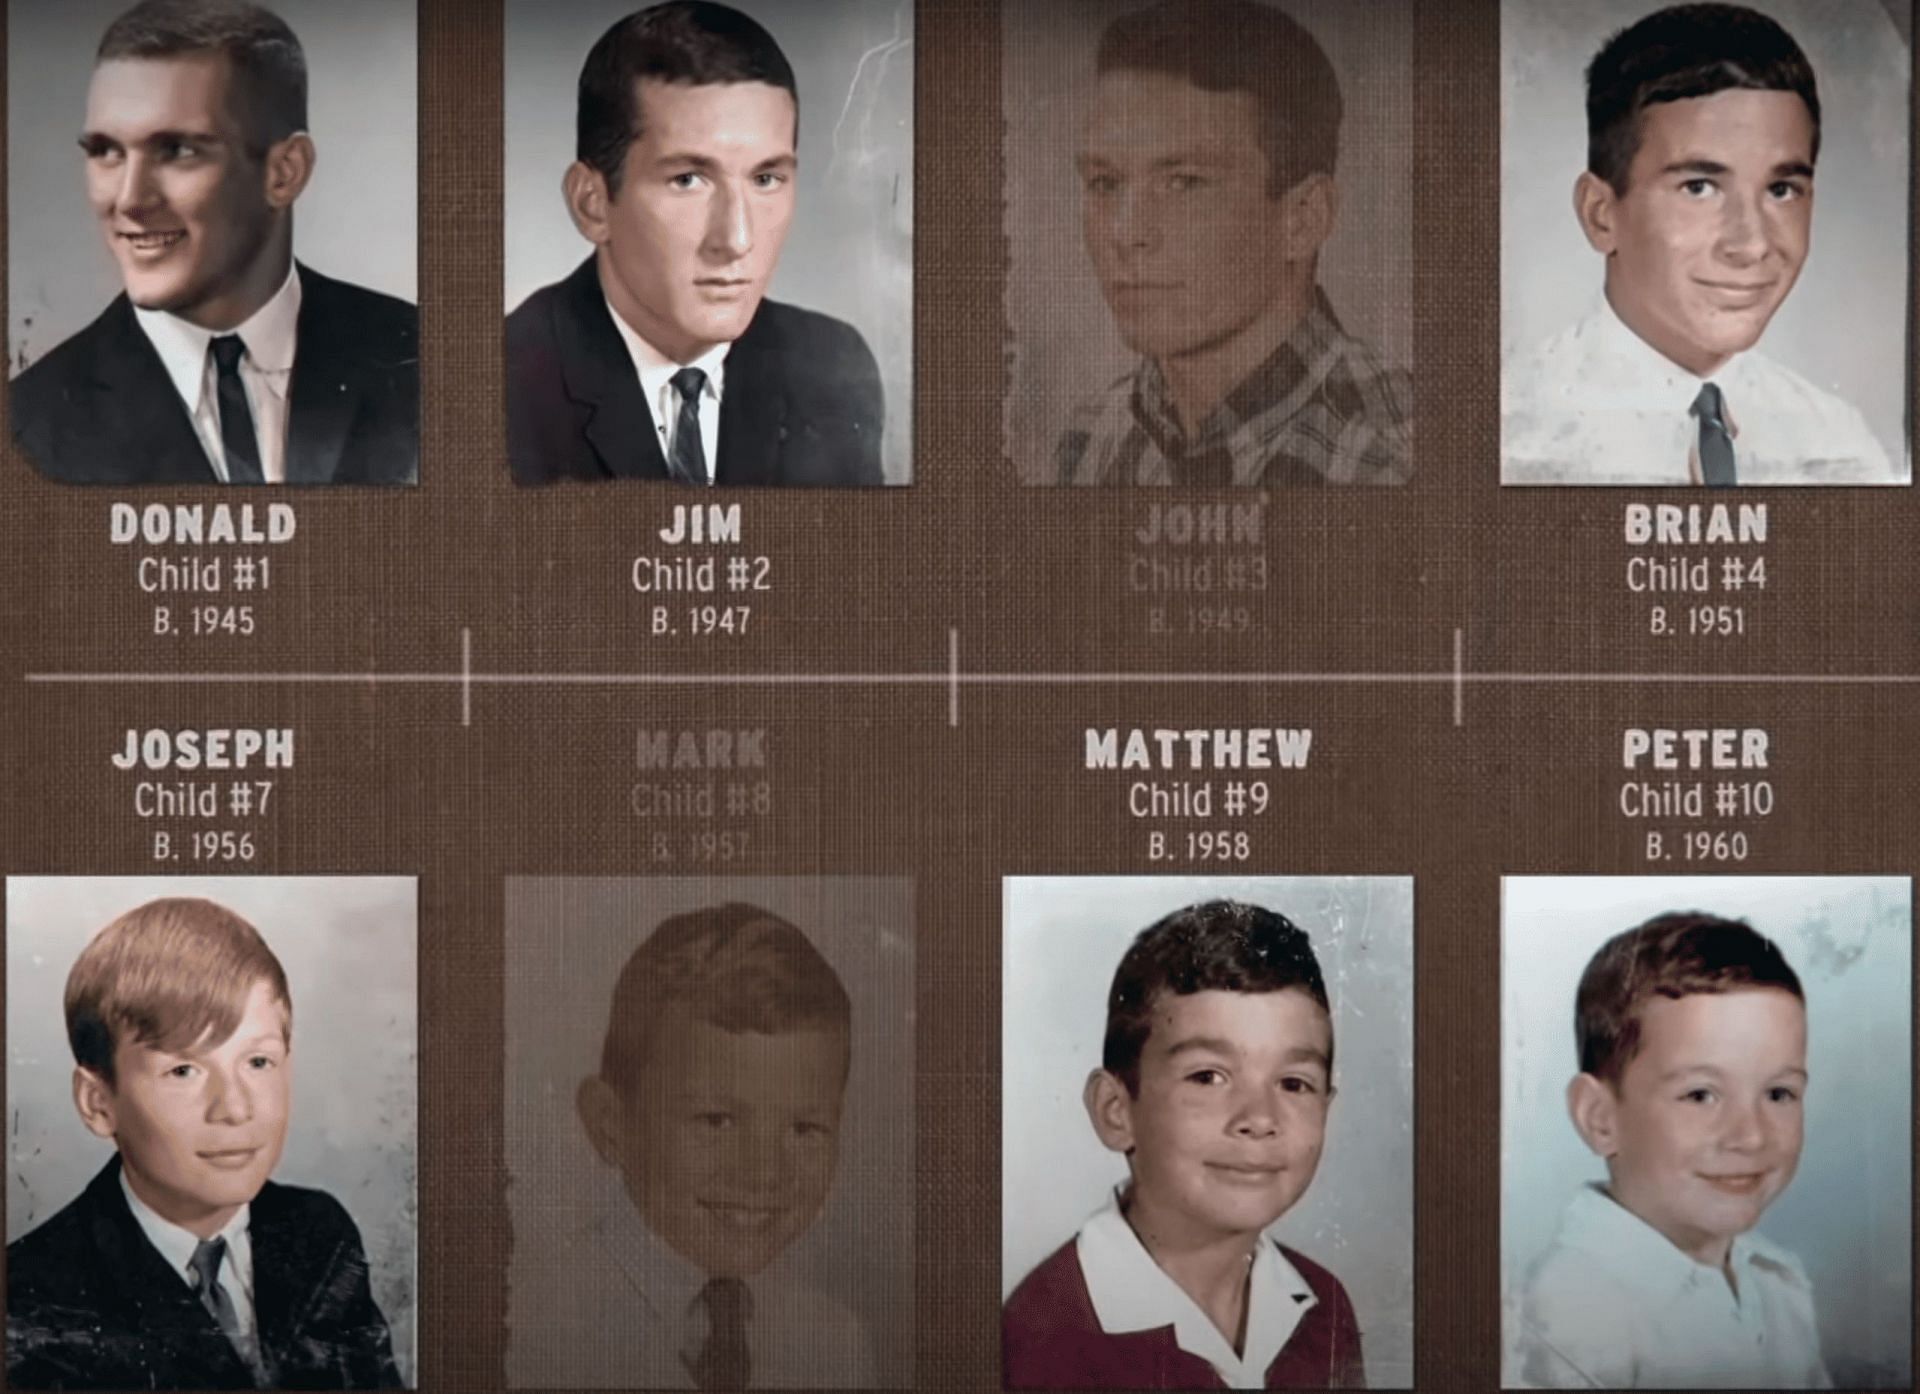 Six Schizophrenic Brothers (Image via Youtube / Discovery)